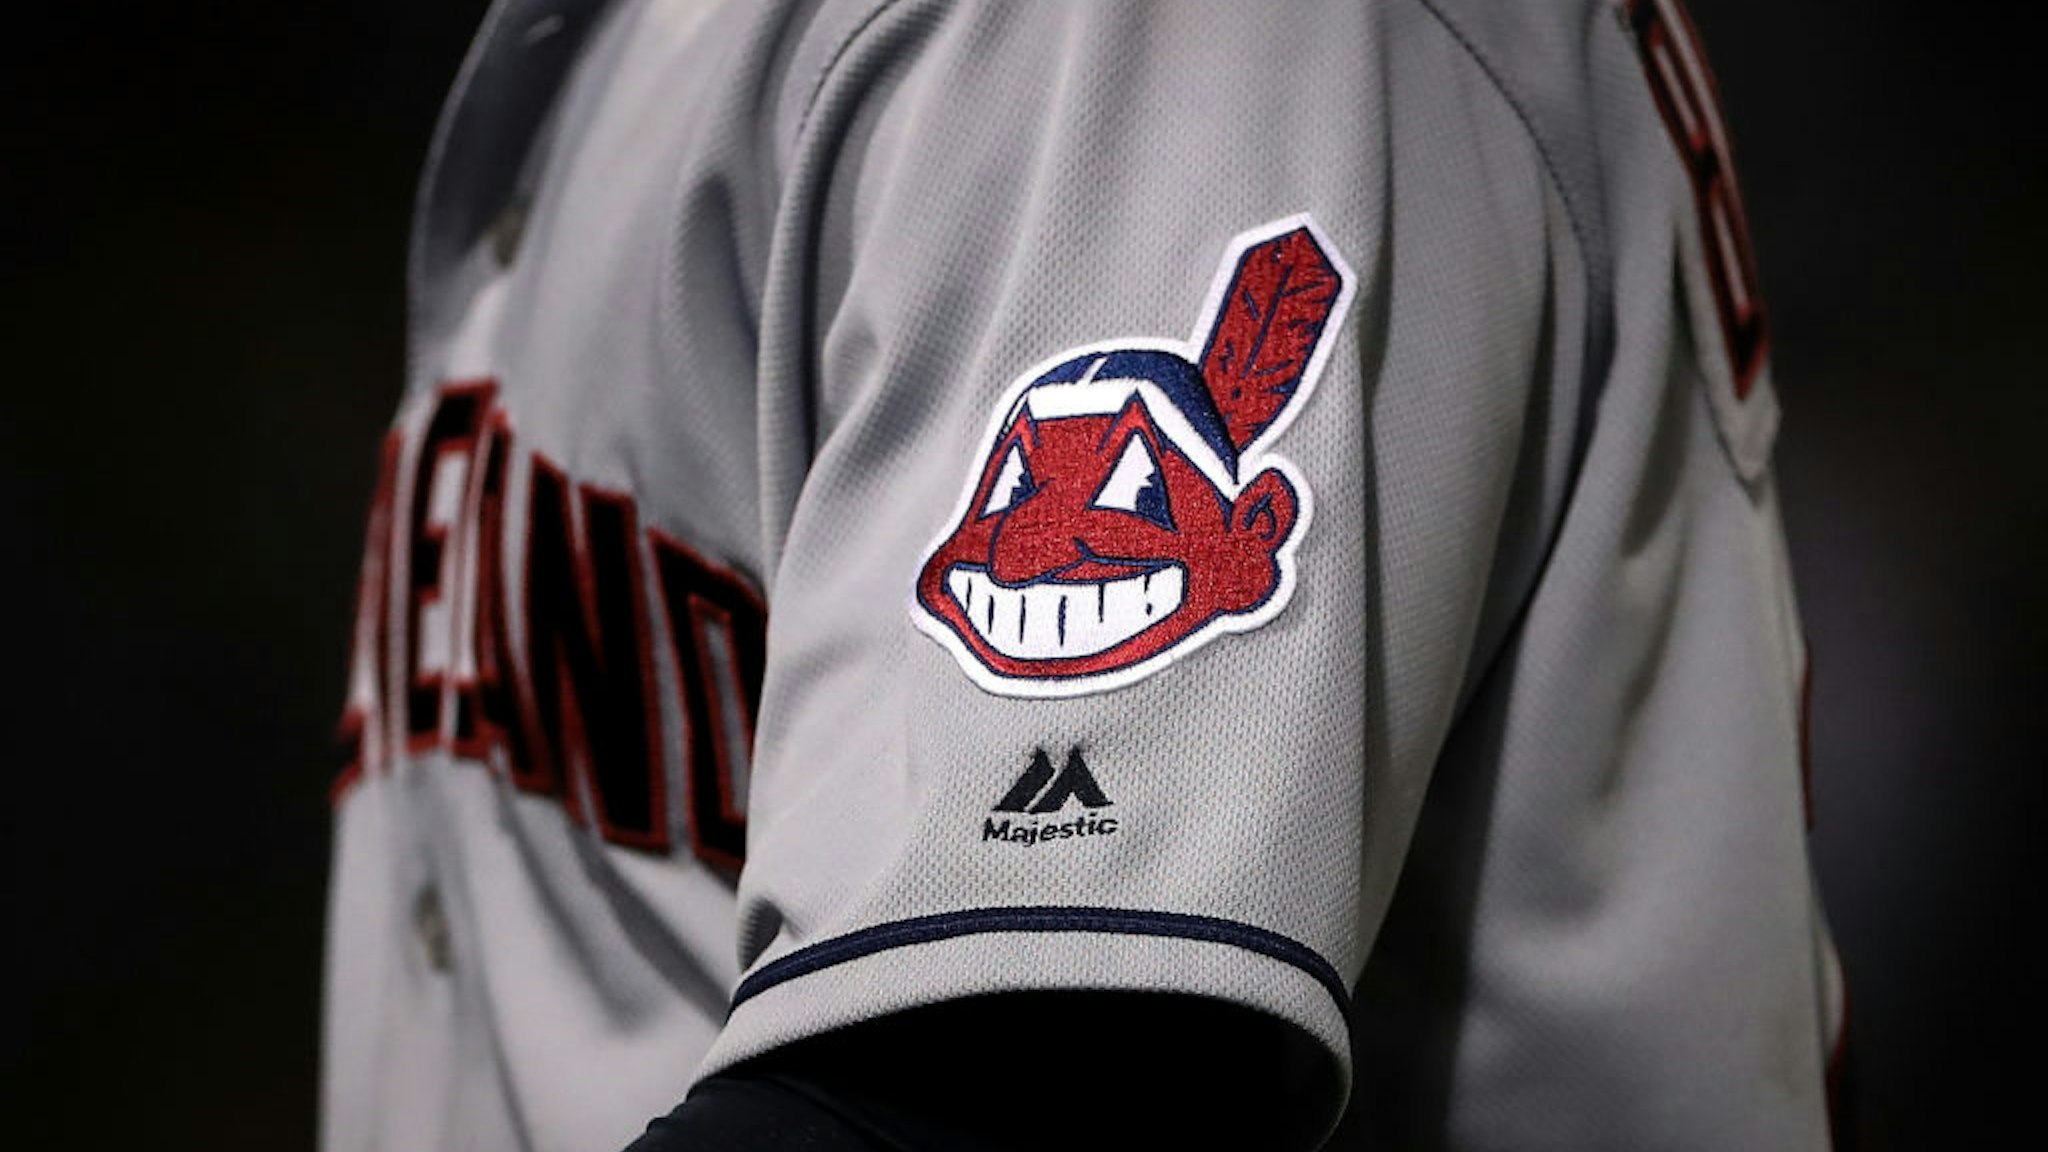 CHICAGO, IL - JUNE 11: A detail view of the "Chief Wahoo" Cleveland Indians logo on the uniform of Michael Brantley #23 during the game against the Chicago White Sox at Guaranteed Rate Field on June 11, 2018 in Chicago, Illinois. (Photo by Dylan Buell/Getty Images)